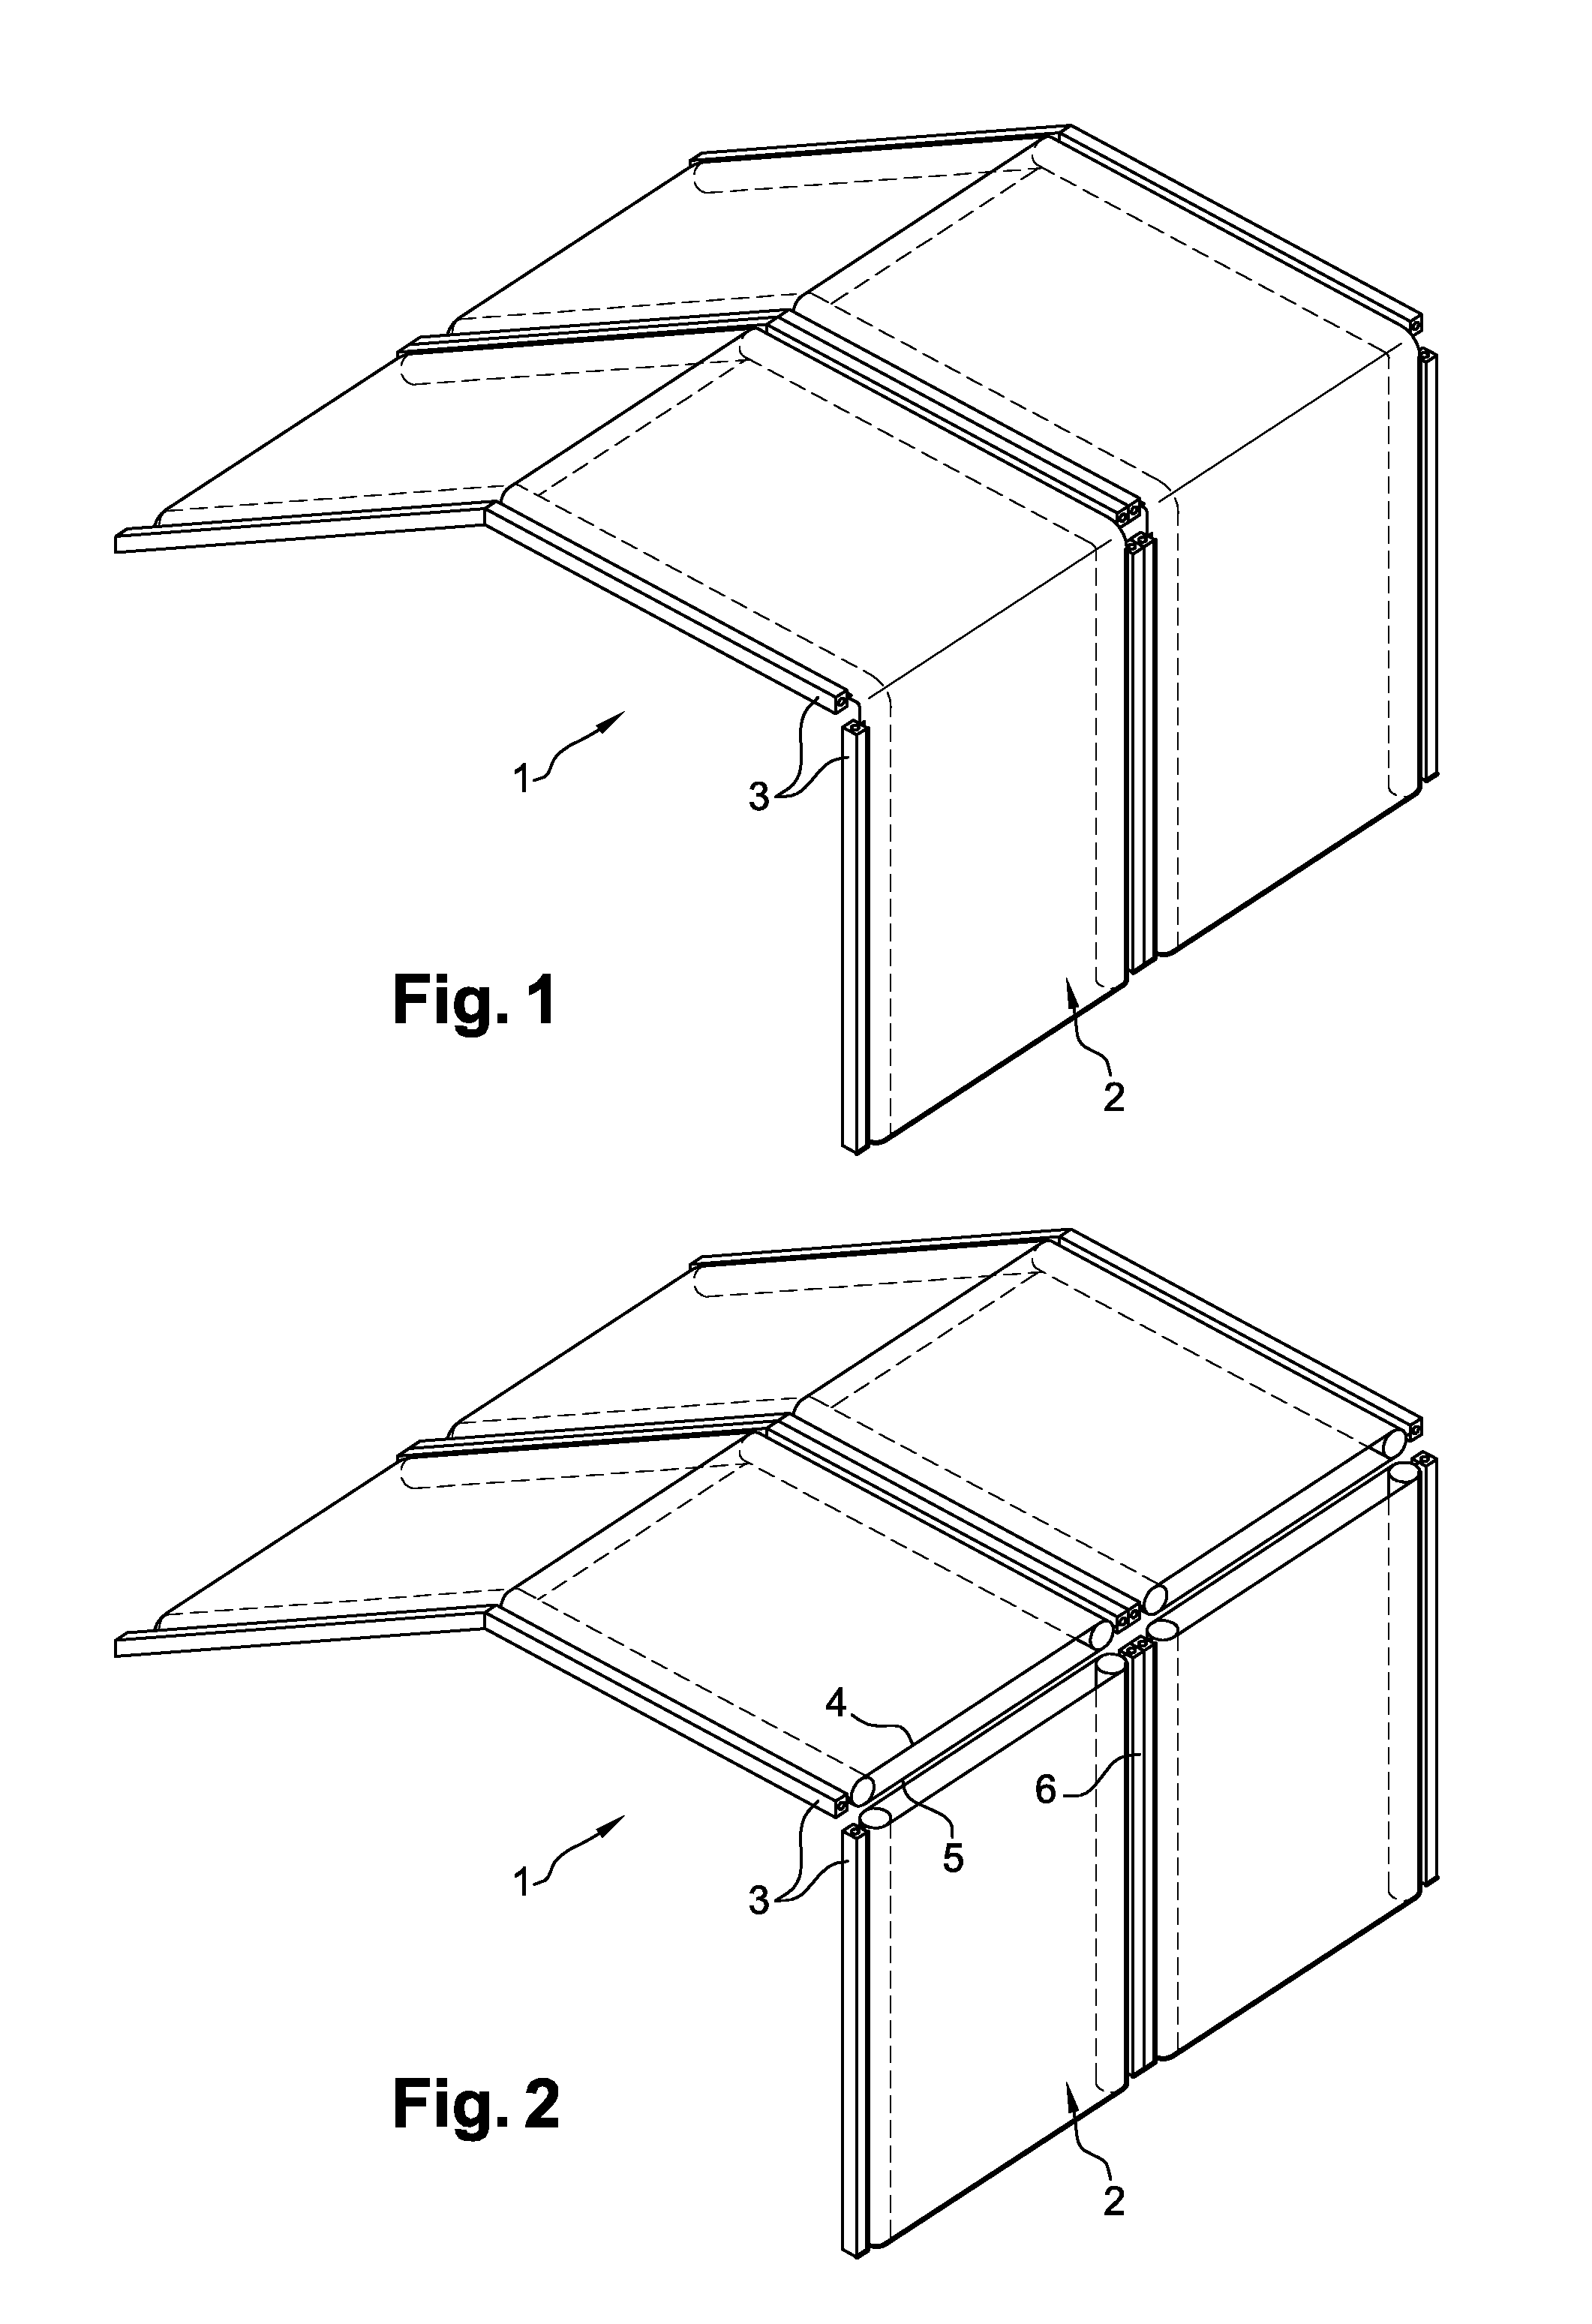 Flexible dual skin wall and device for tensioning a dual skin flexible wall